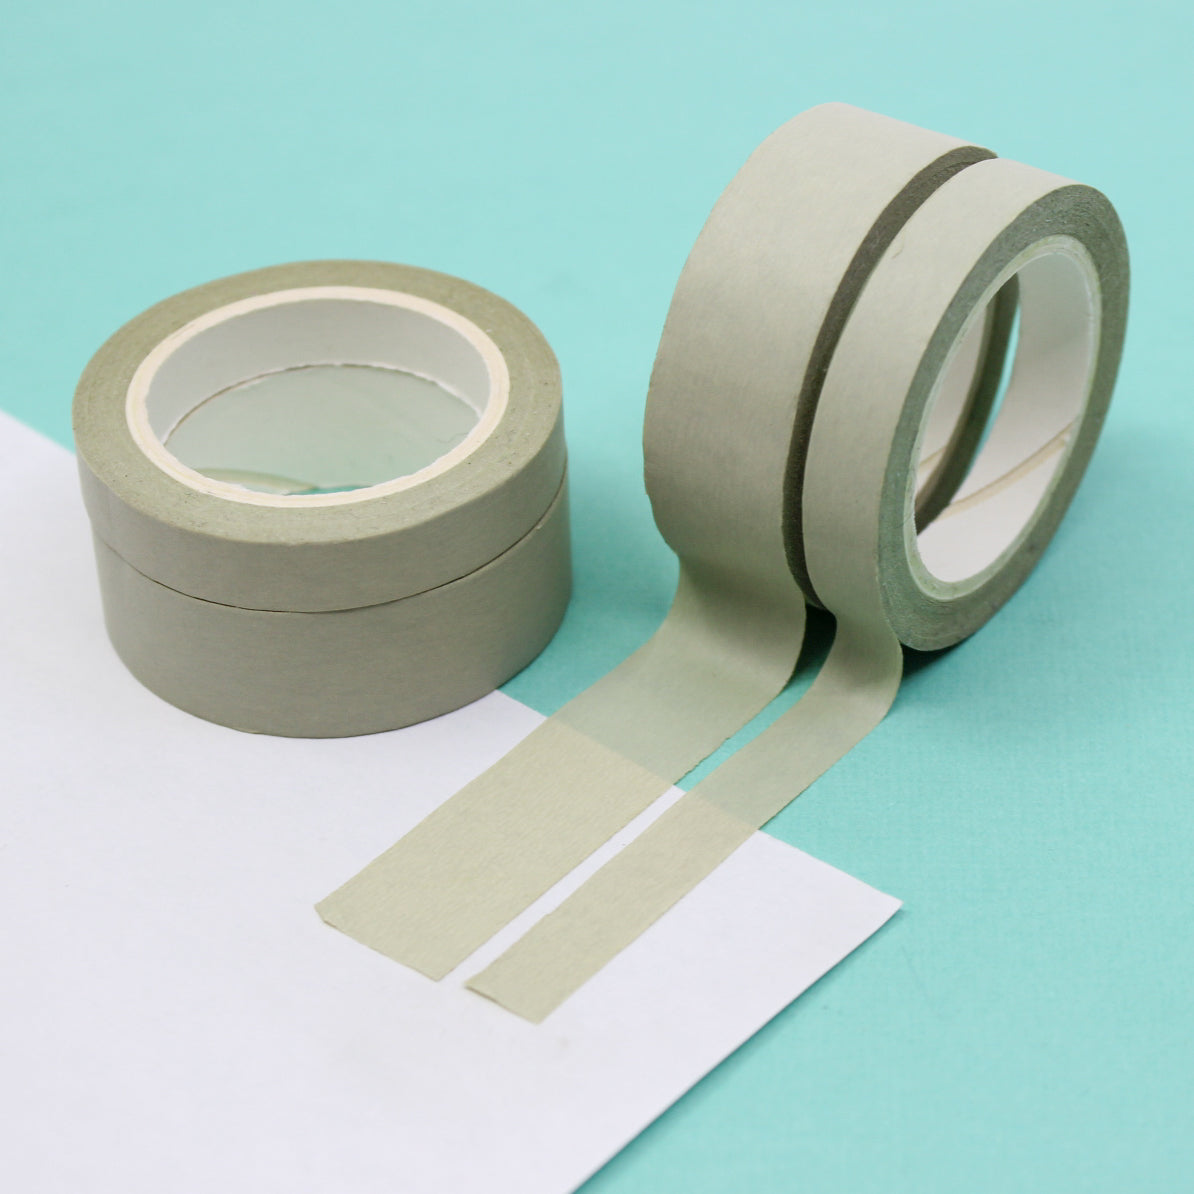 This neutral warm grey solid washi tape is vibrant and fun. This washi tape is part of our solid neon thick-thin matching duo washi collection. Find the perfect color for any project in BBB Supplies' thick-thin solids collection, from neon to neutral to pastel and more. This tape is sold at BBB Supplies Craft Shop.